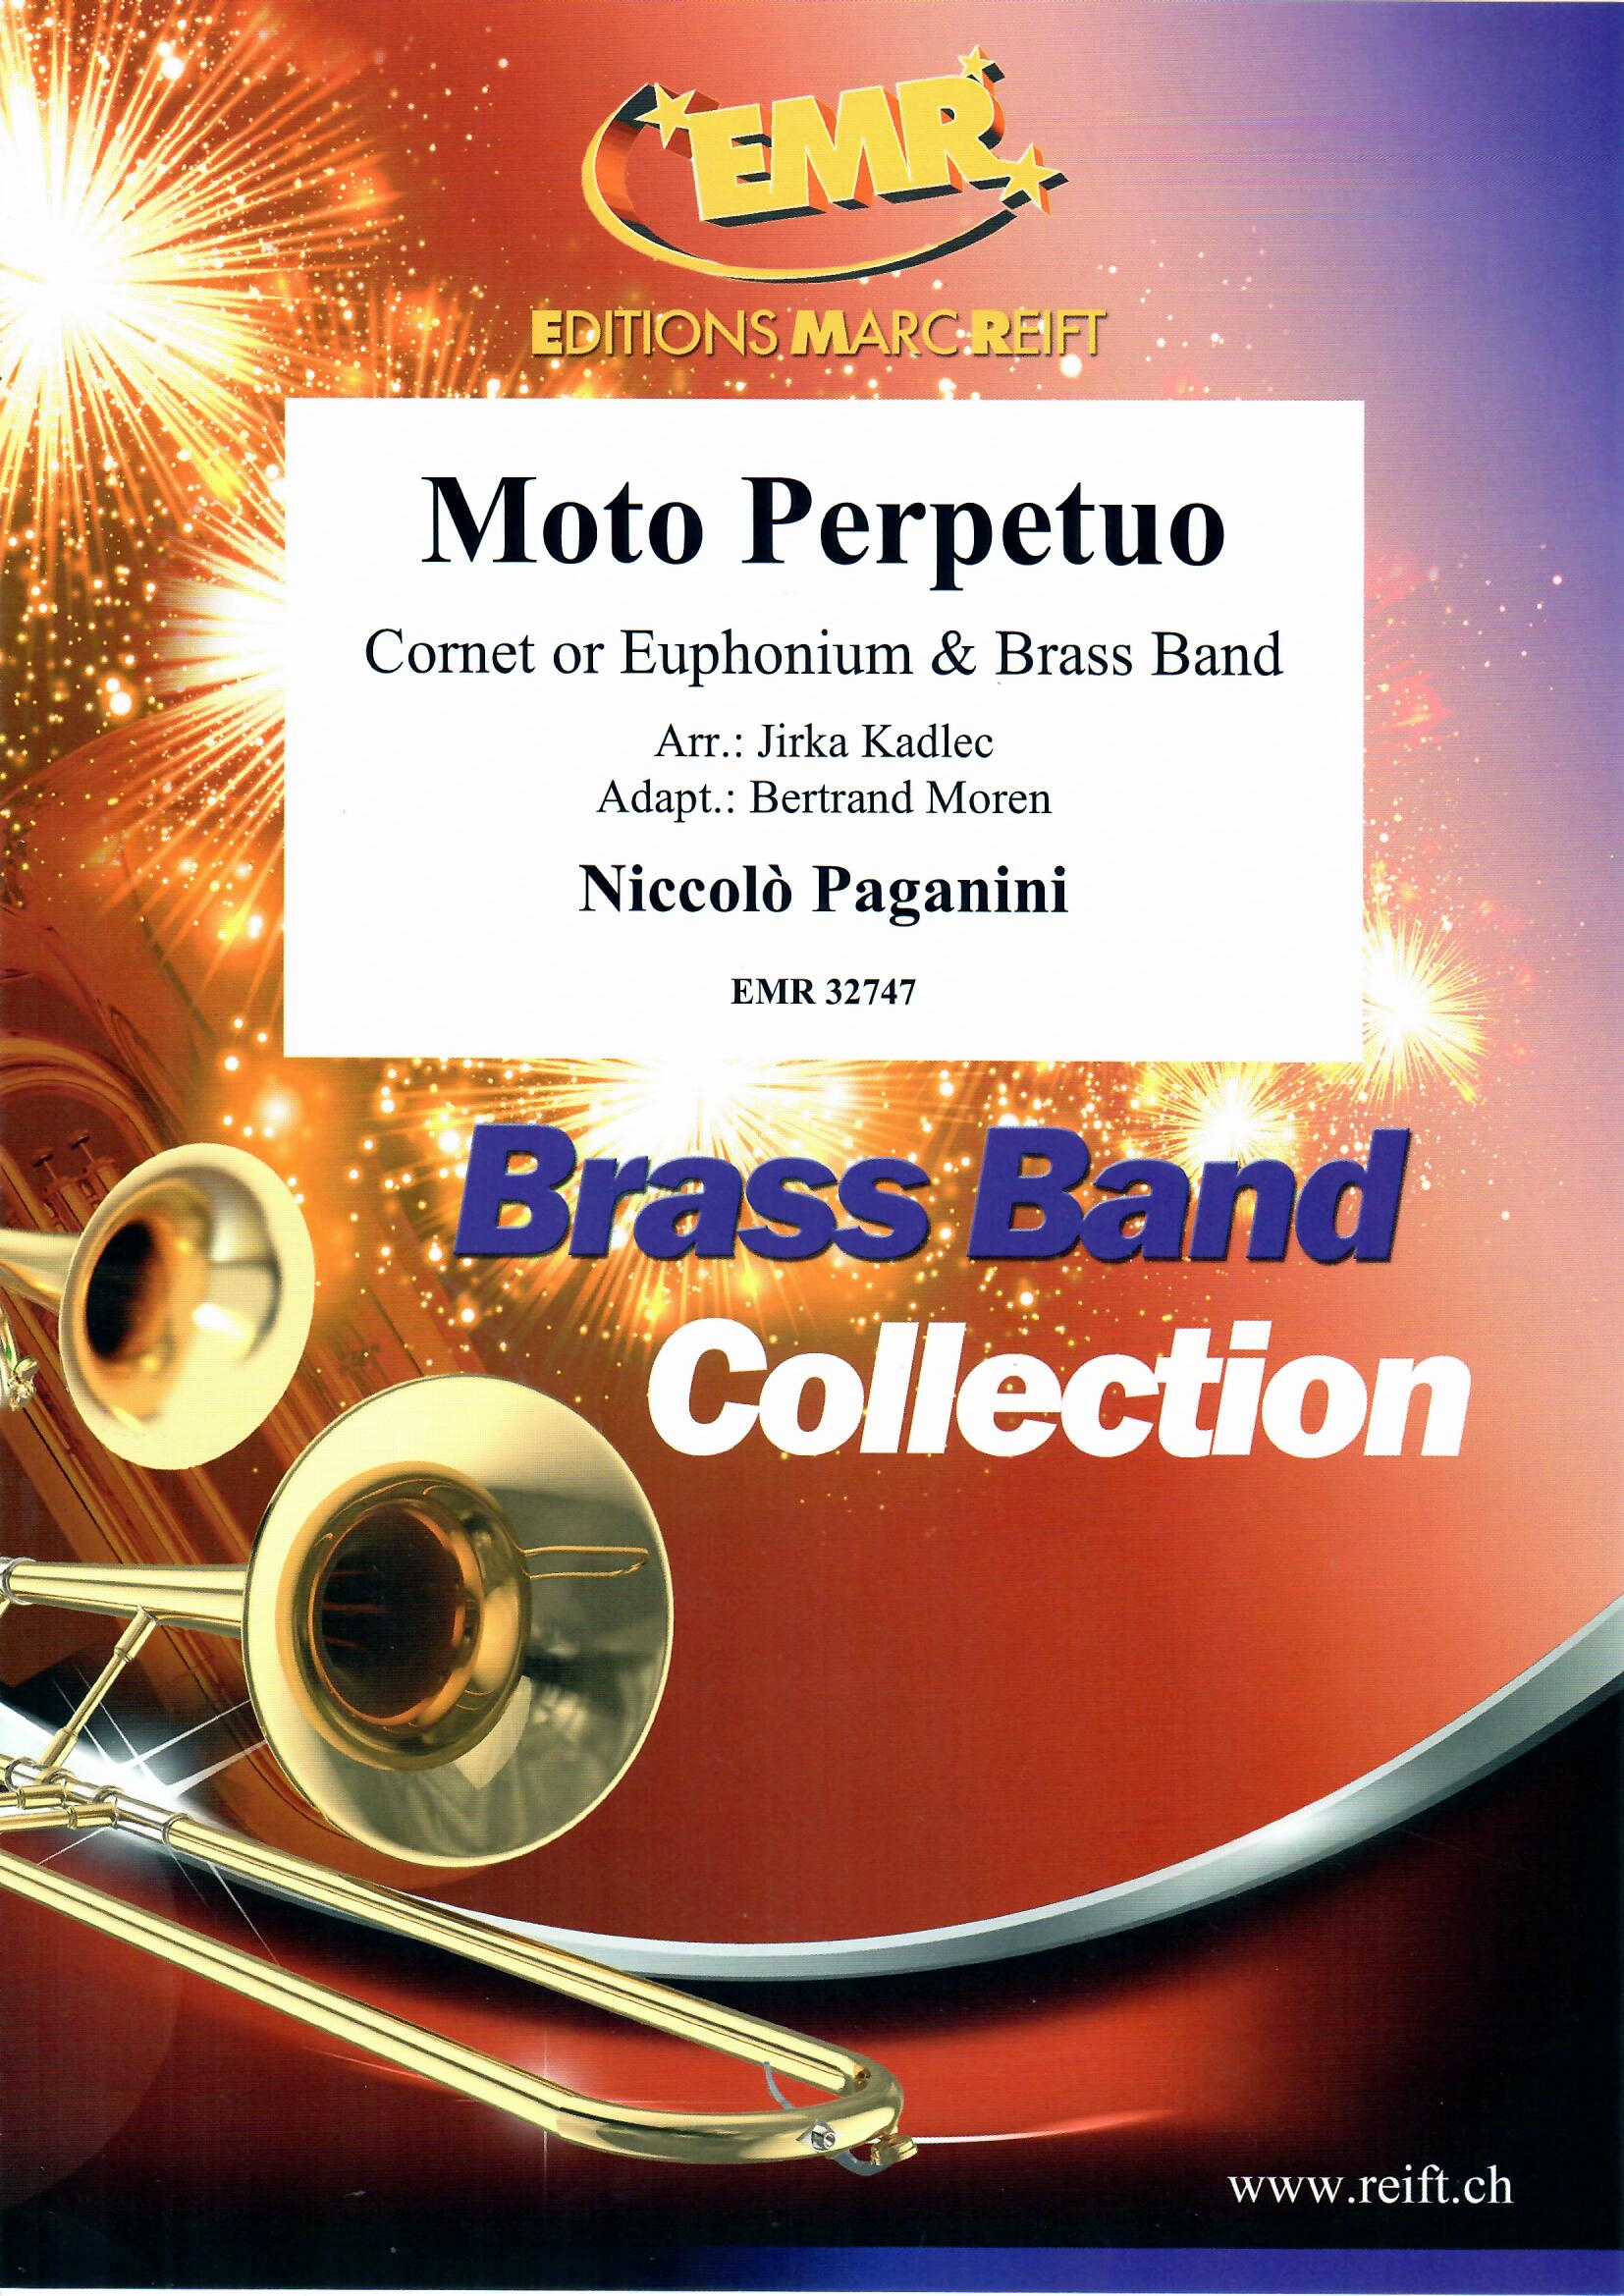 MOTO PERPETUO - Bb.Solo with Band, LIGHT CONCERT MUSIC